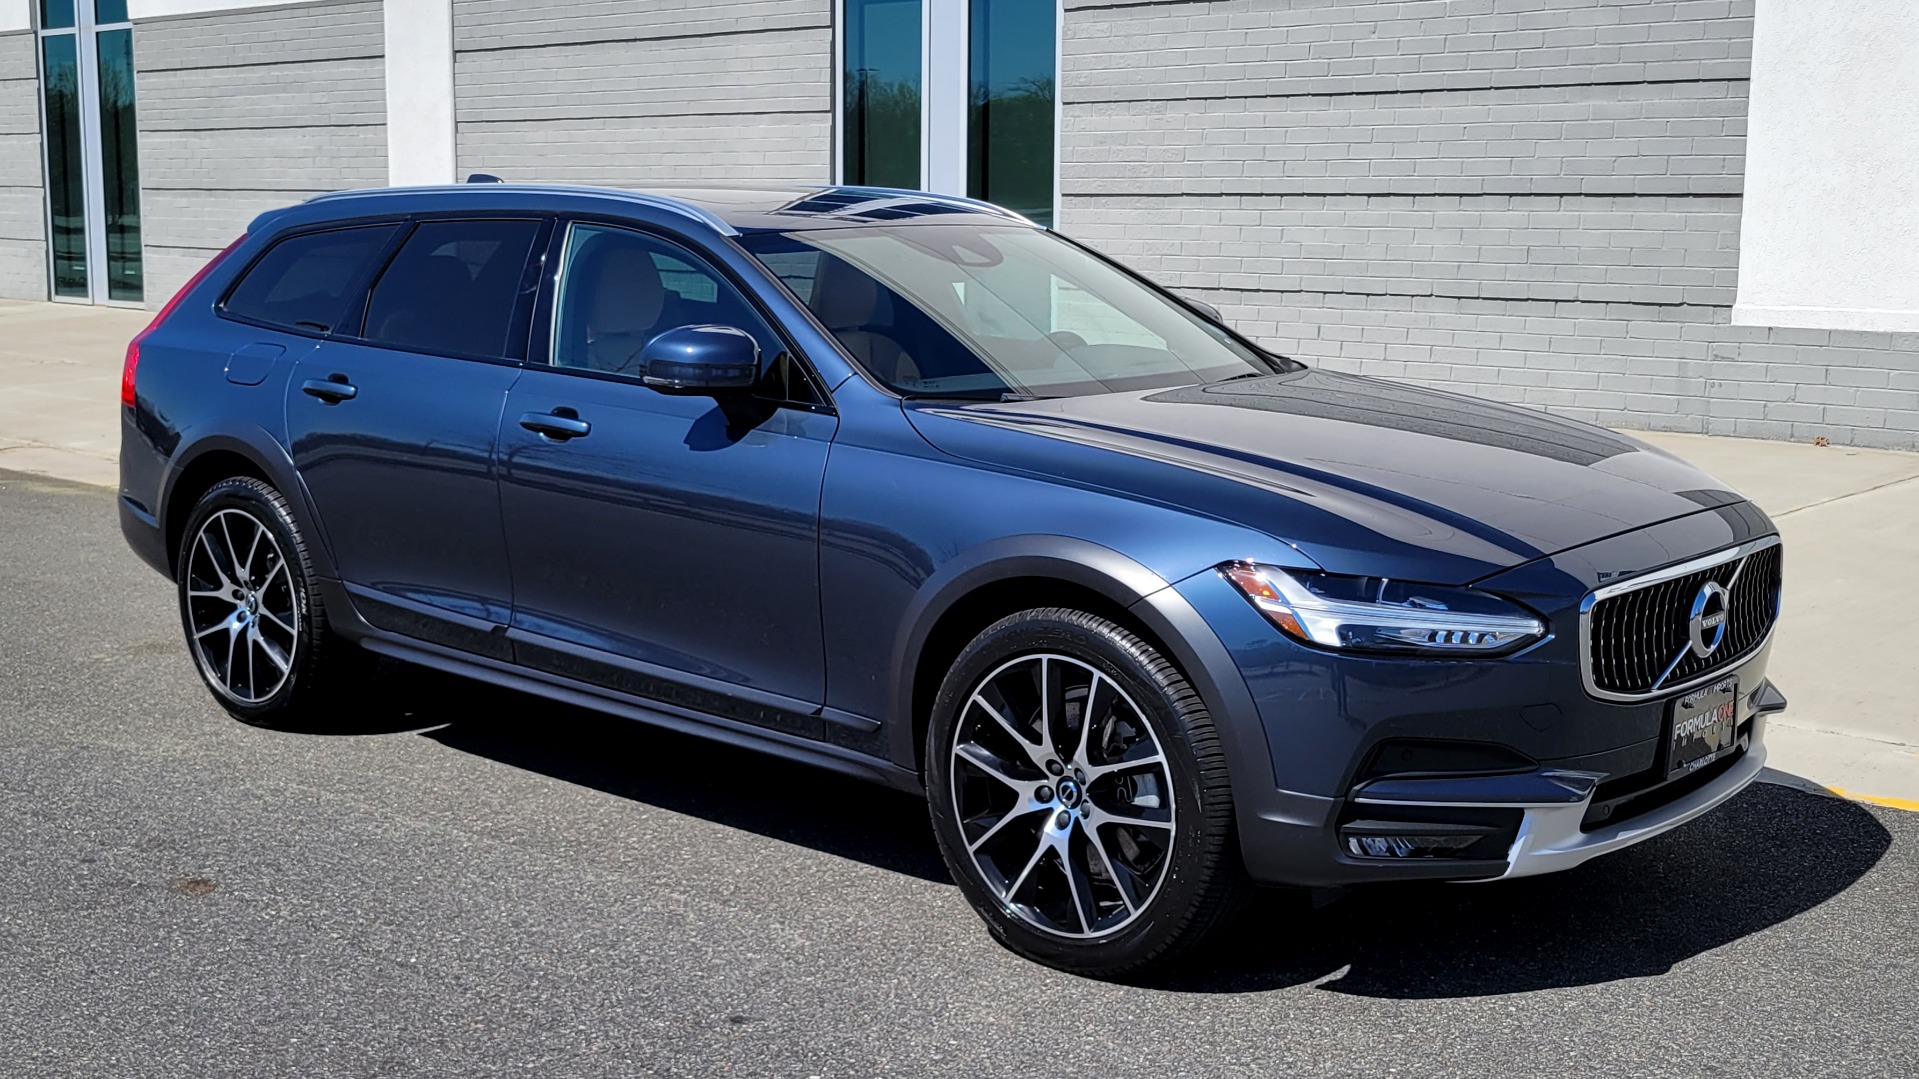 Used 2020 Volvo V90 CROSS COUNTRY T6 2.0L WAGON / AWD / HTD STS / PROTECTION PKG / REARVIEW for sale $55,000 at Formula Imports in Charlotte NC 28227 4